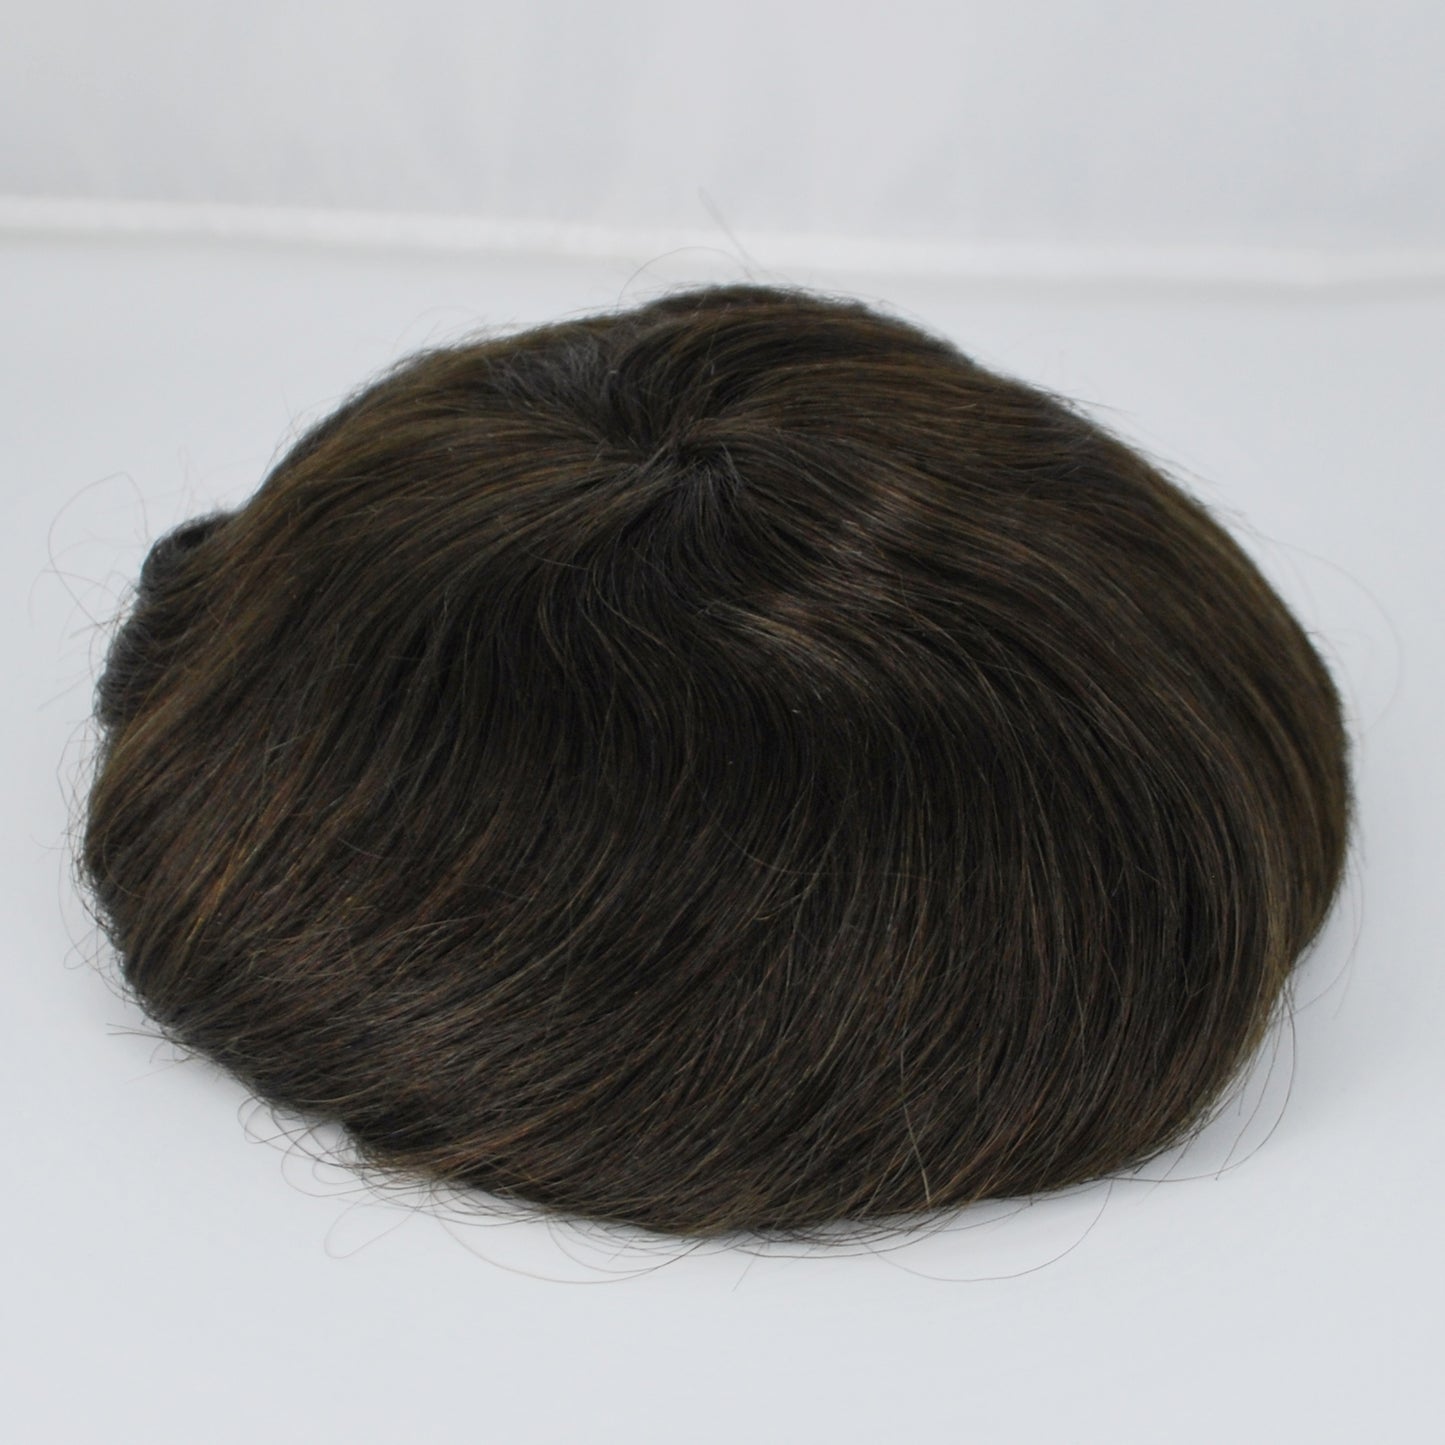 Clearance 8x6 men toupee french lace with PU around dark brown hair system lace front hairpiece